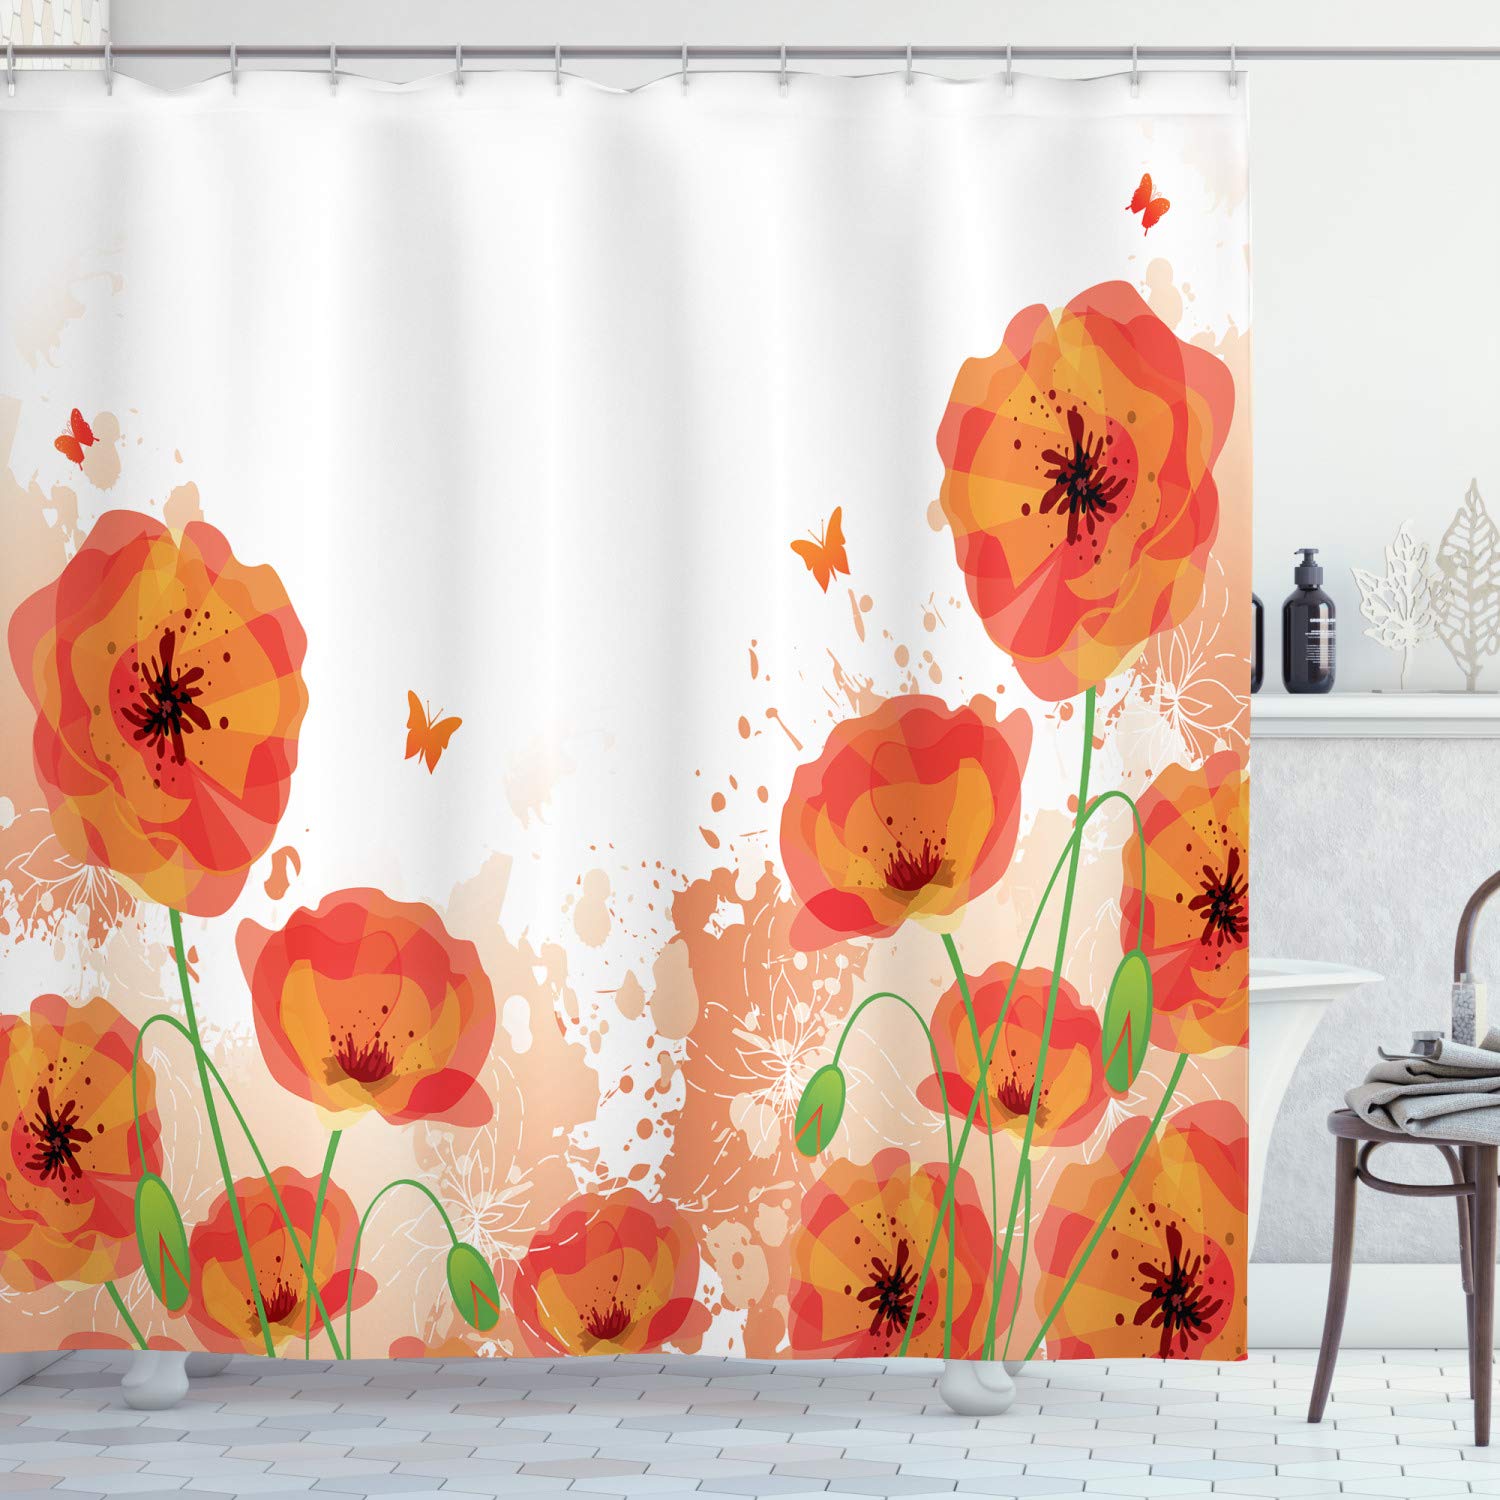 Ambesonne Poppy Shower Curtain, Digital Watercolors Design of Poppy Classic Botany Bouquet Patterns Print, Cloth Fabric Bathroom Decor Set with Hooks, 75" Long, Orange White